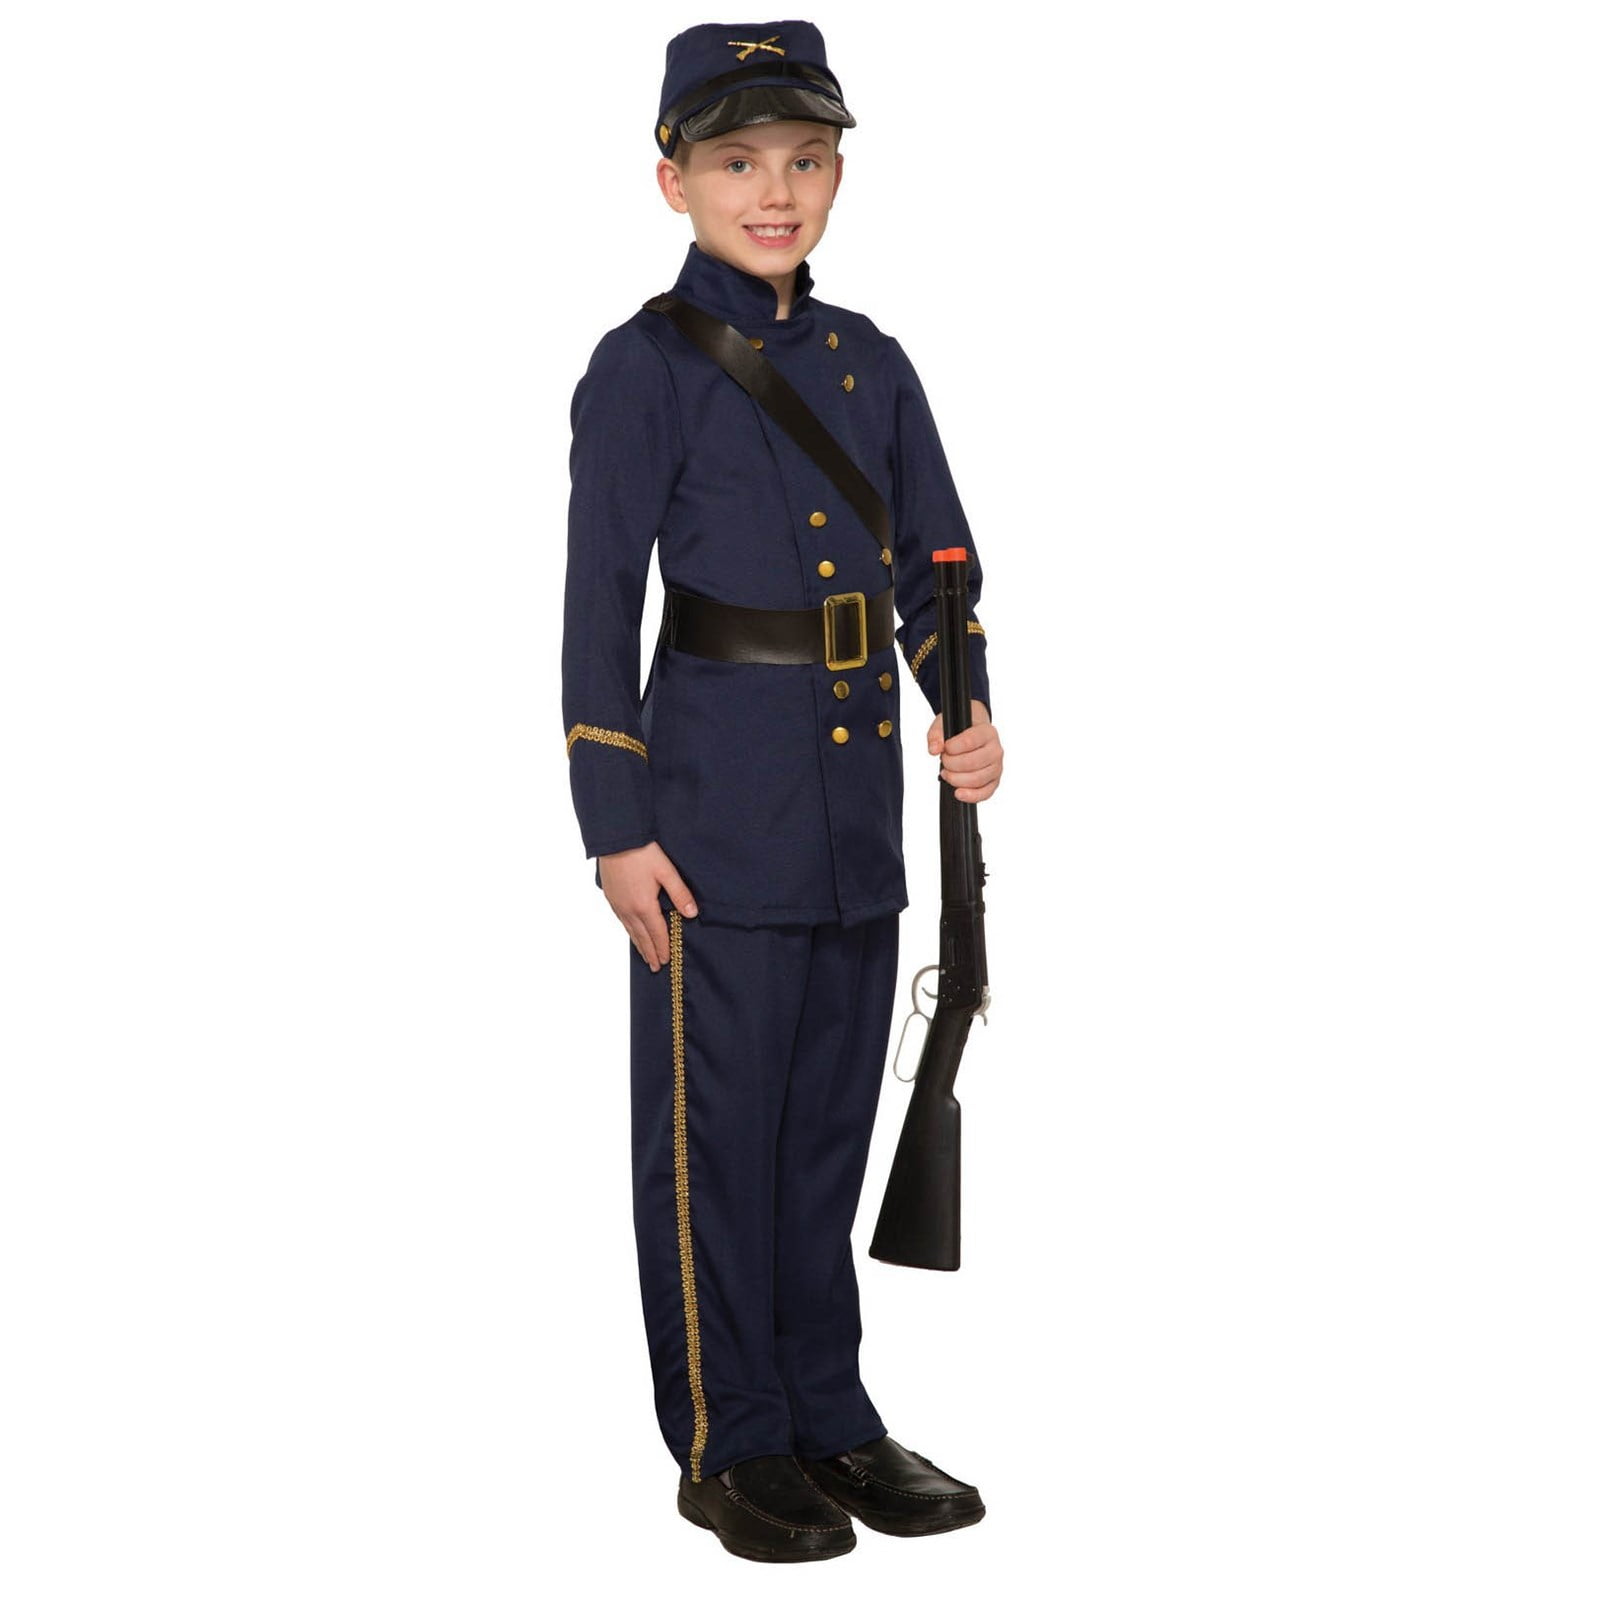 Confederate Officer Army Soldier Child Historical Costume Civil War Uniform 